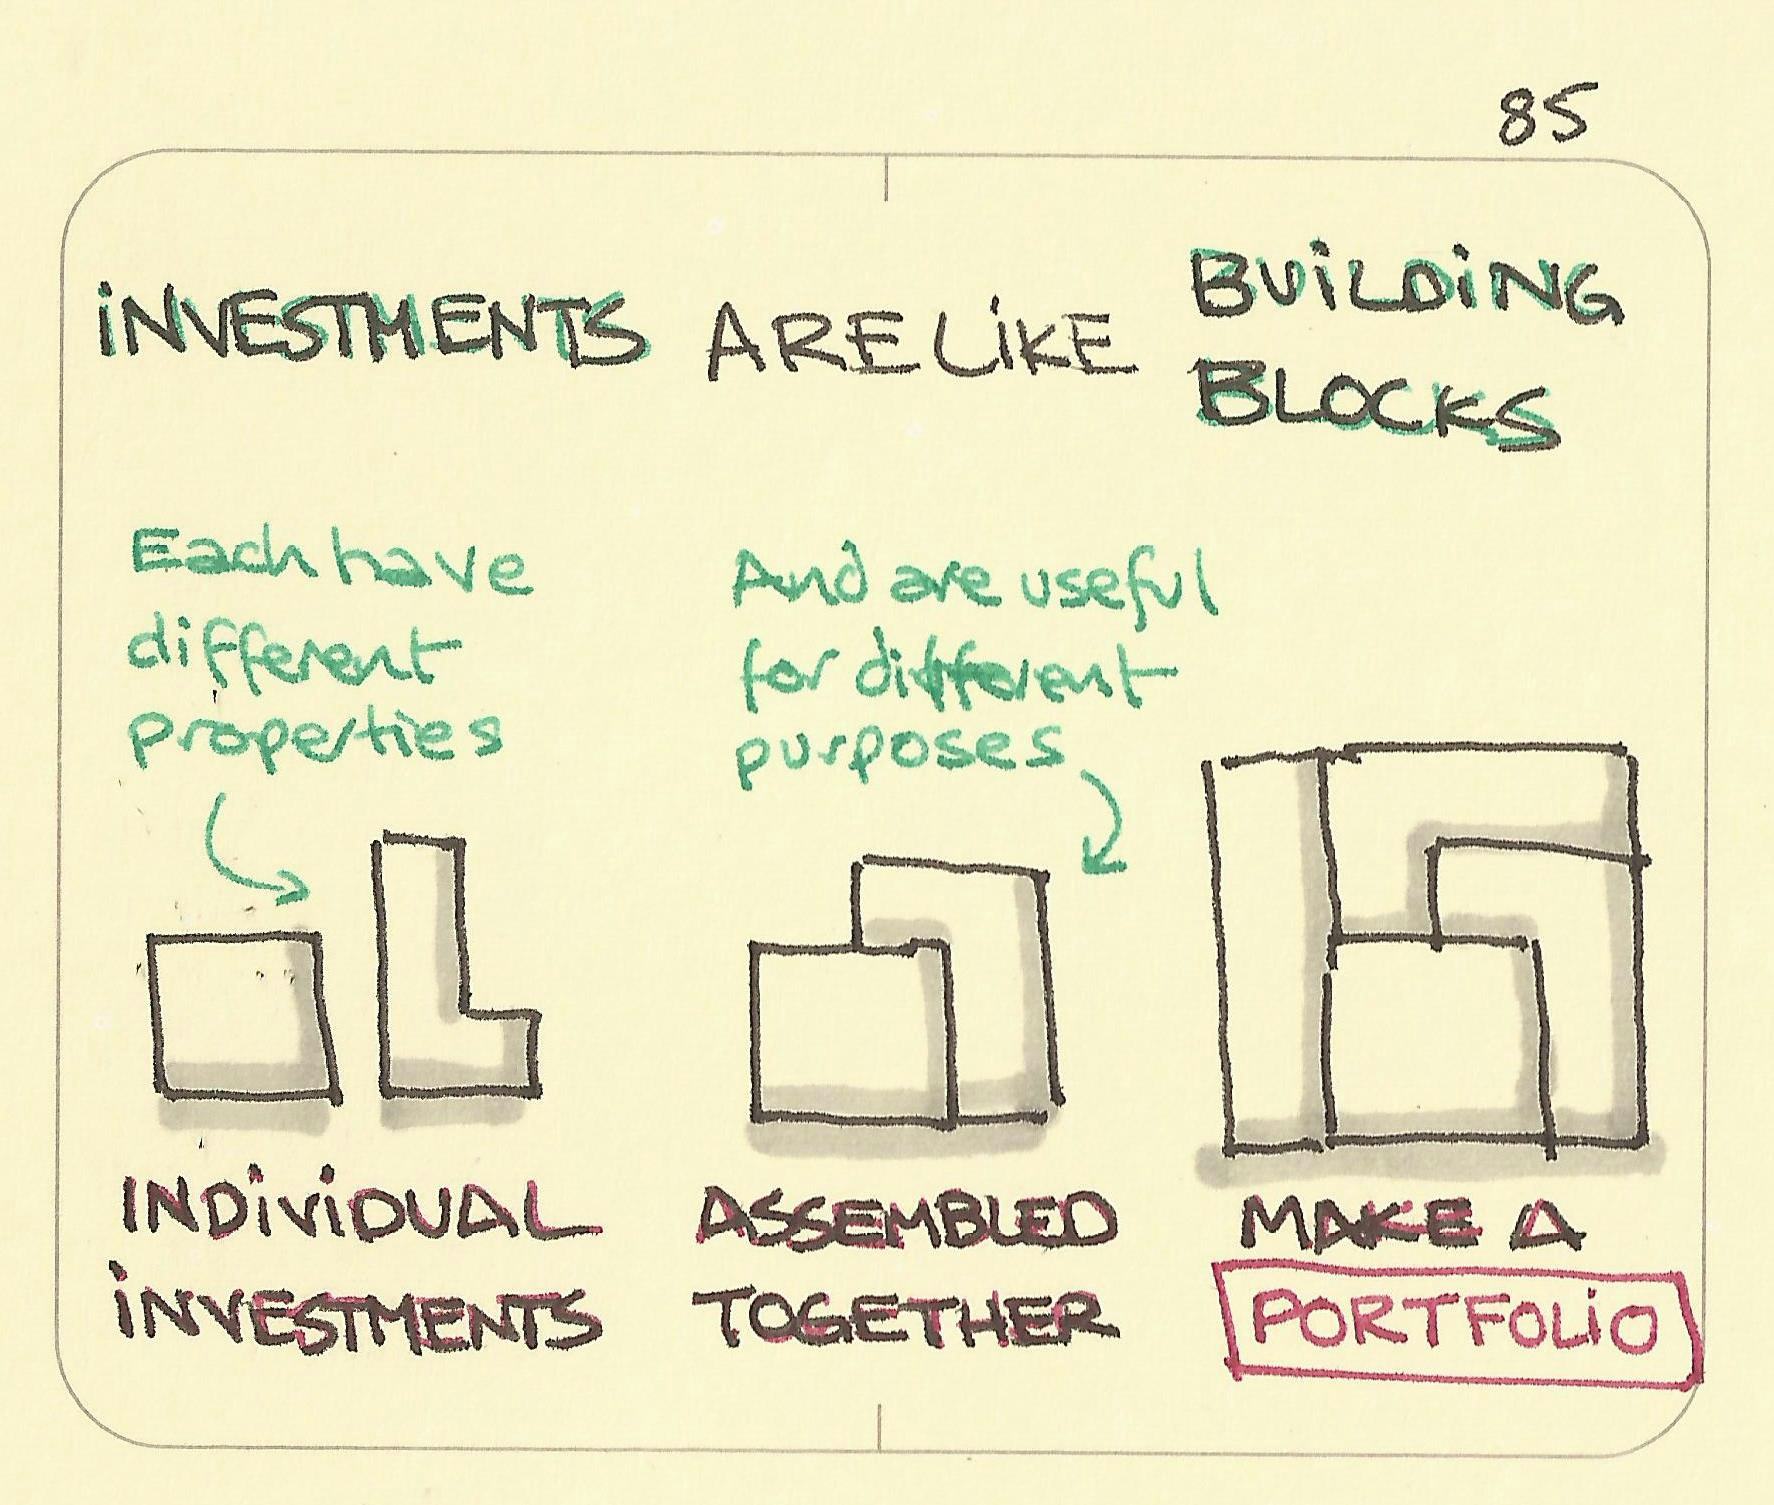 Investments are like building blocks - Sketchplanations